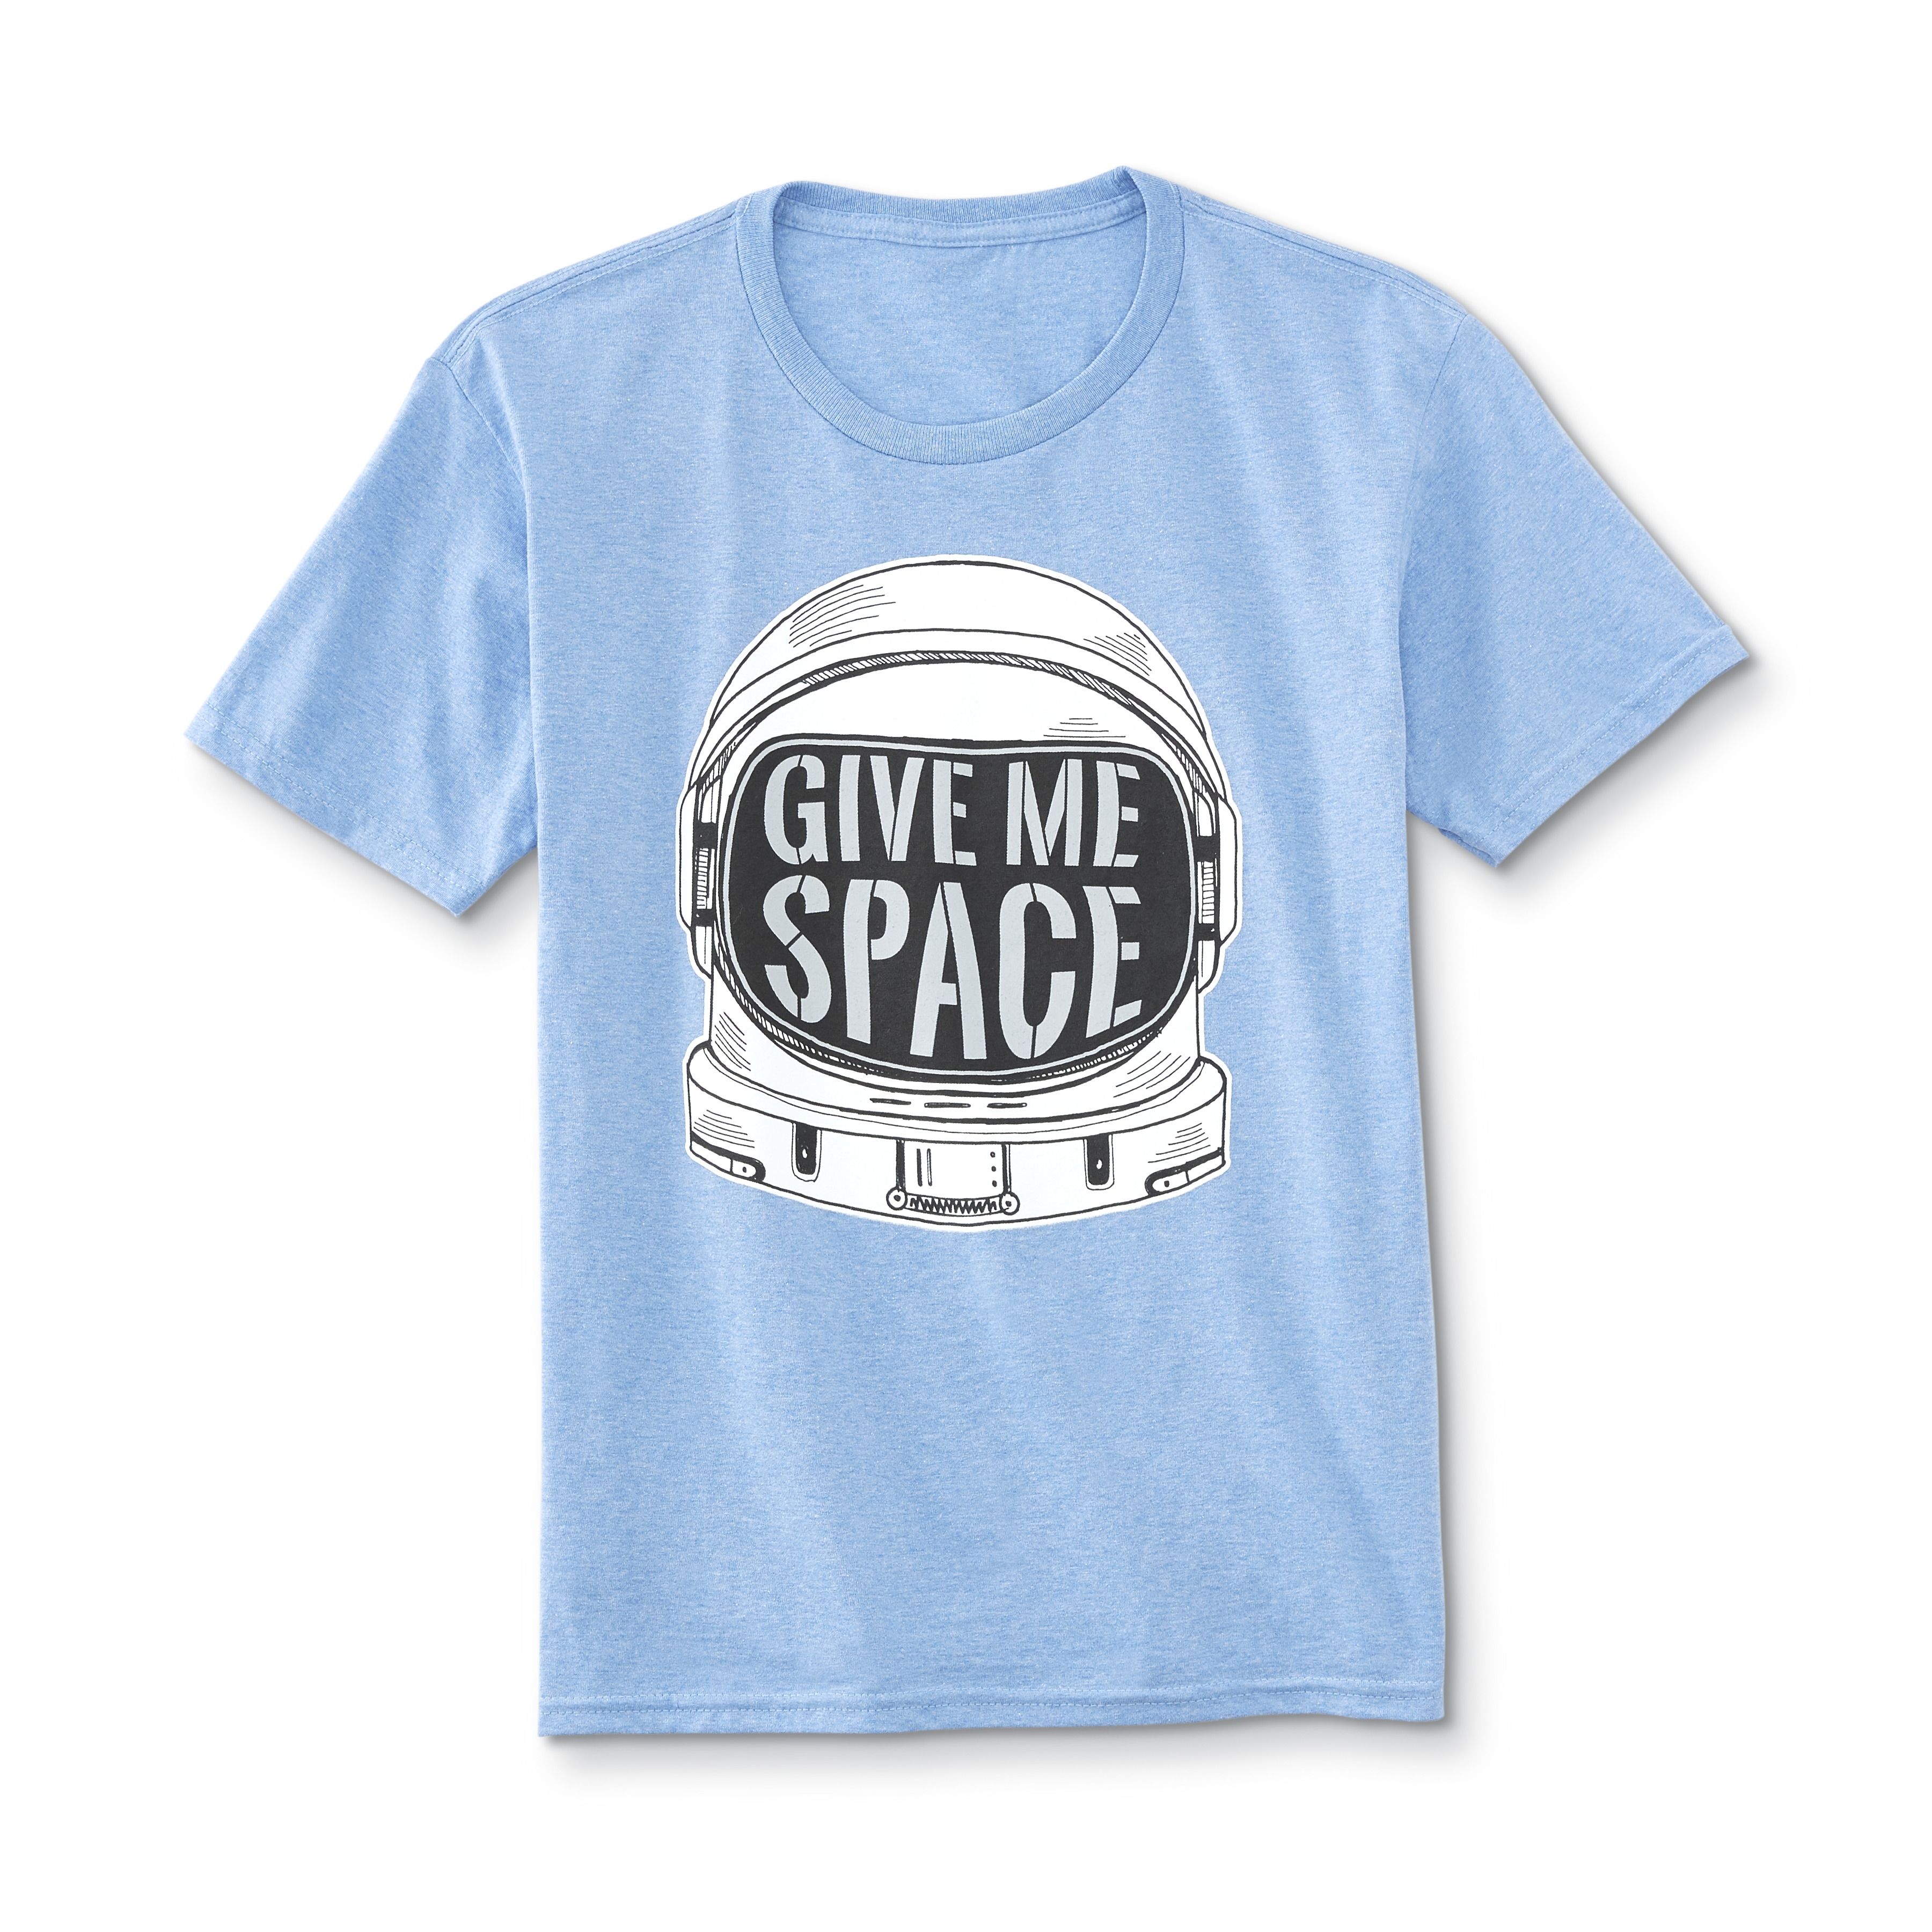 Screen Tee Market Brands Graphic T-Shirt - Give Me Space